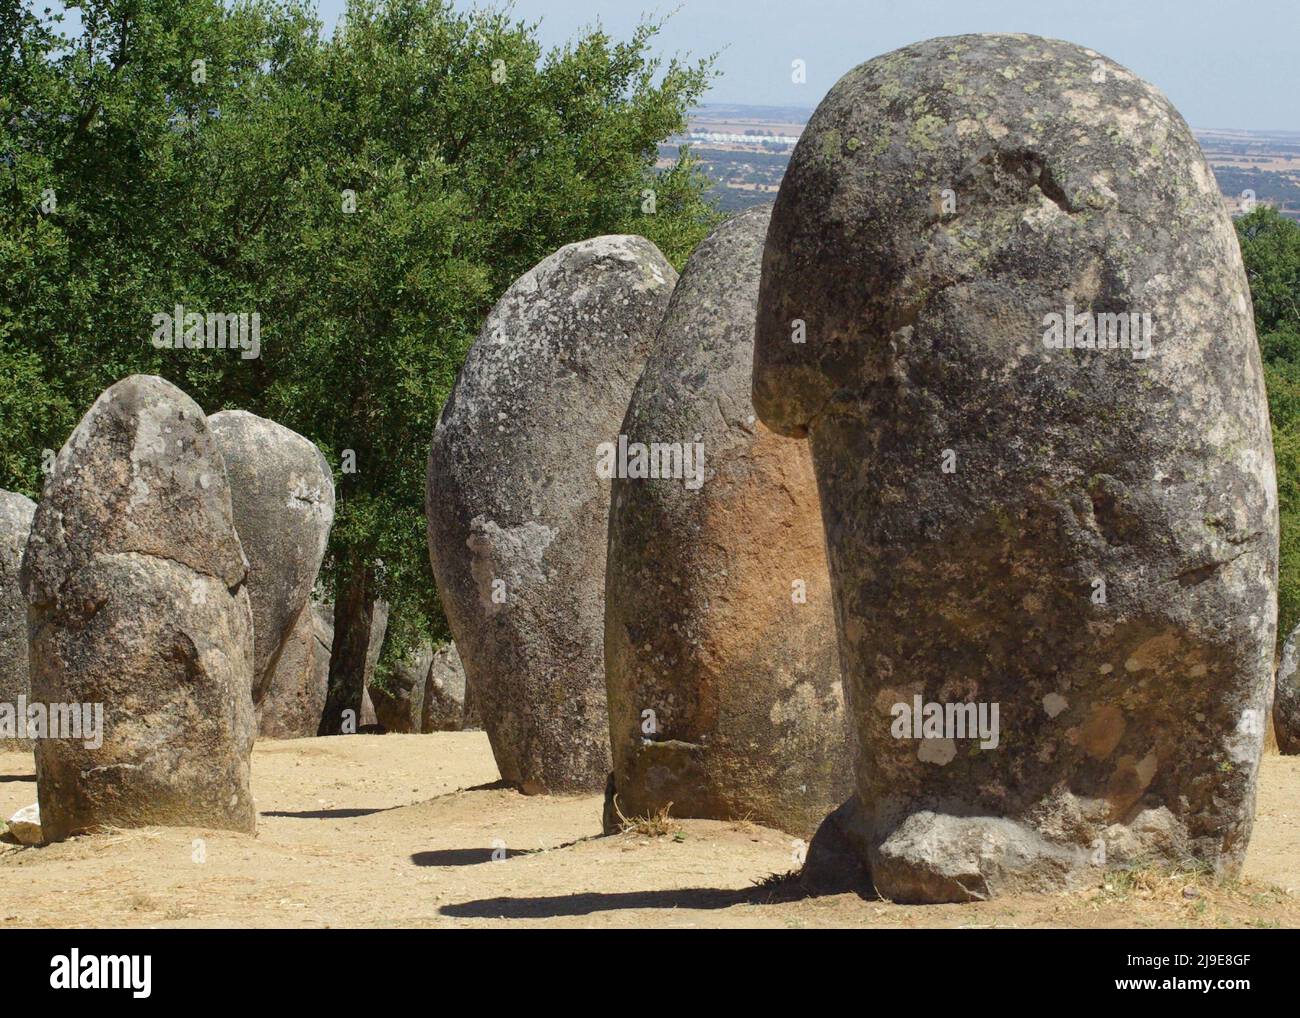 Megaliths in rows at neolithic site, casting shadows with copy space. Stock Photo